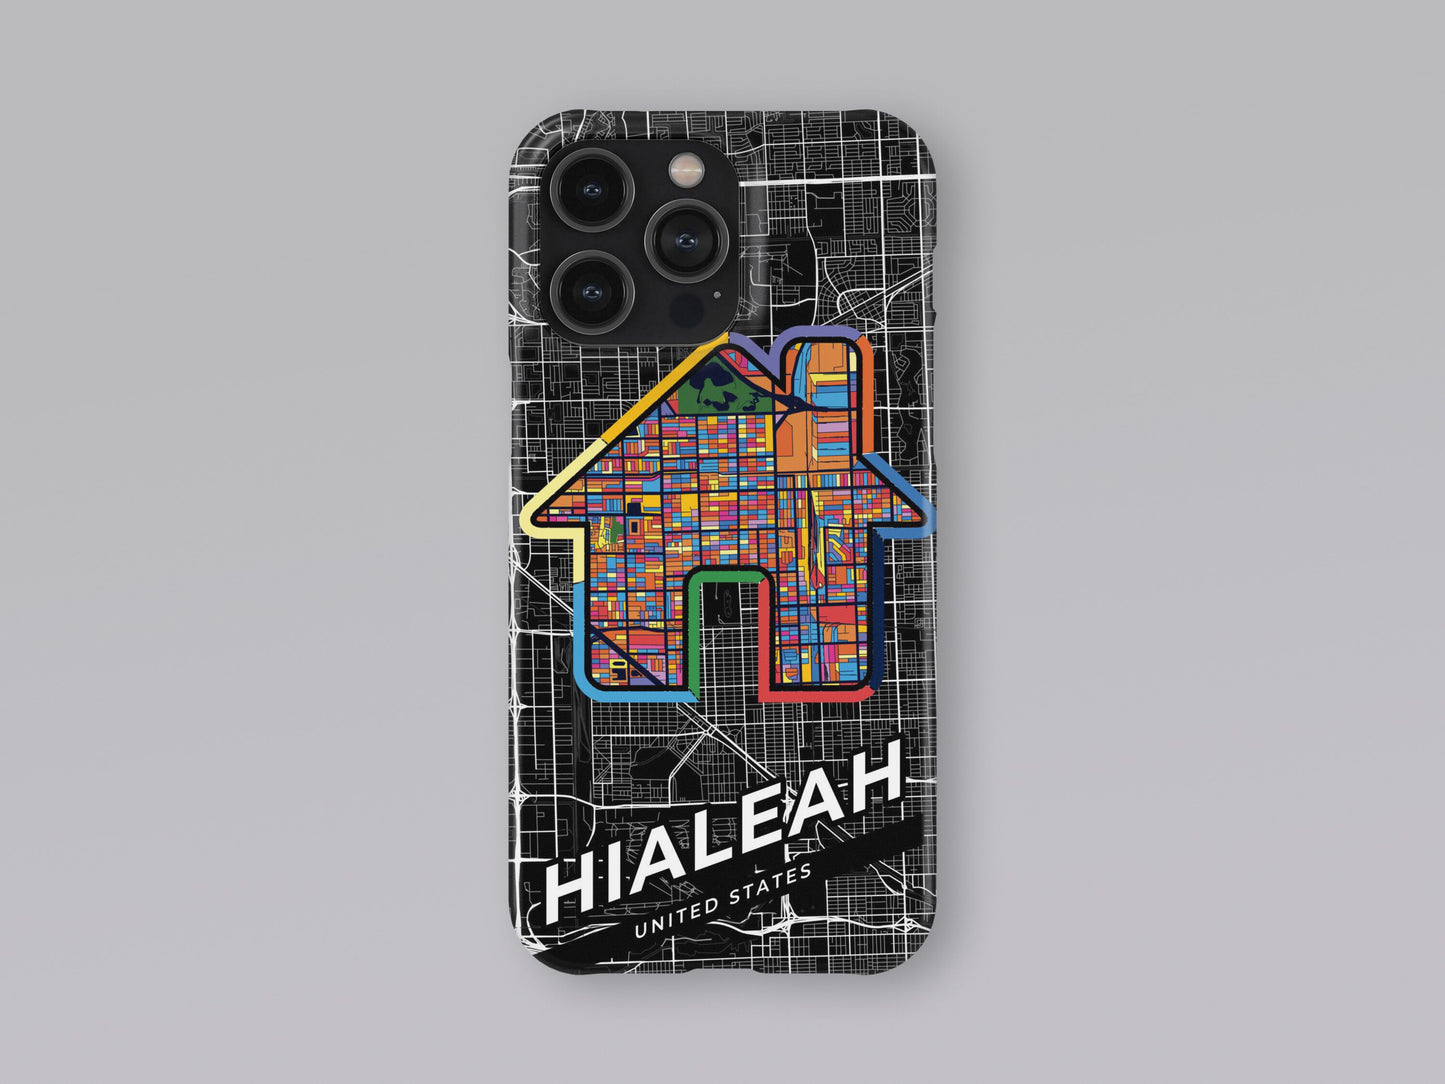 Hialeah Florida slim phone case with colorful icon. Birthday, wedding or housewarming gift. Couple match cases. 3